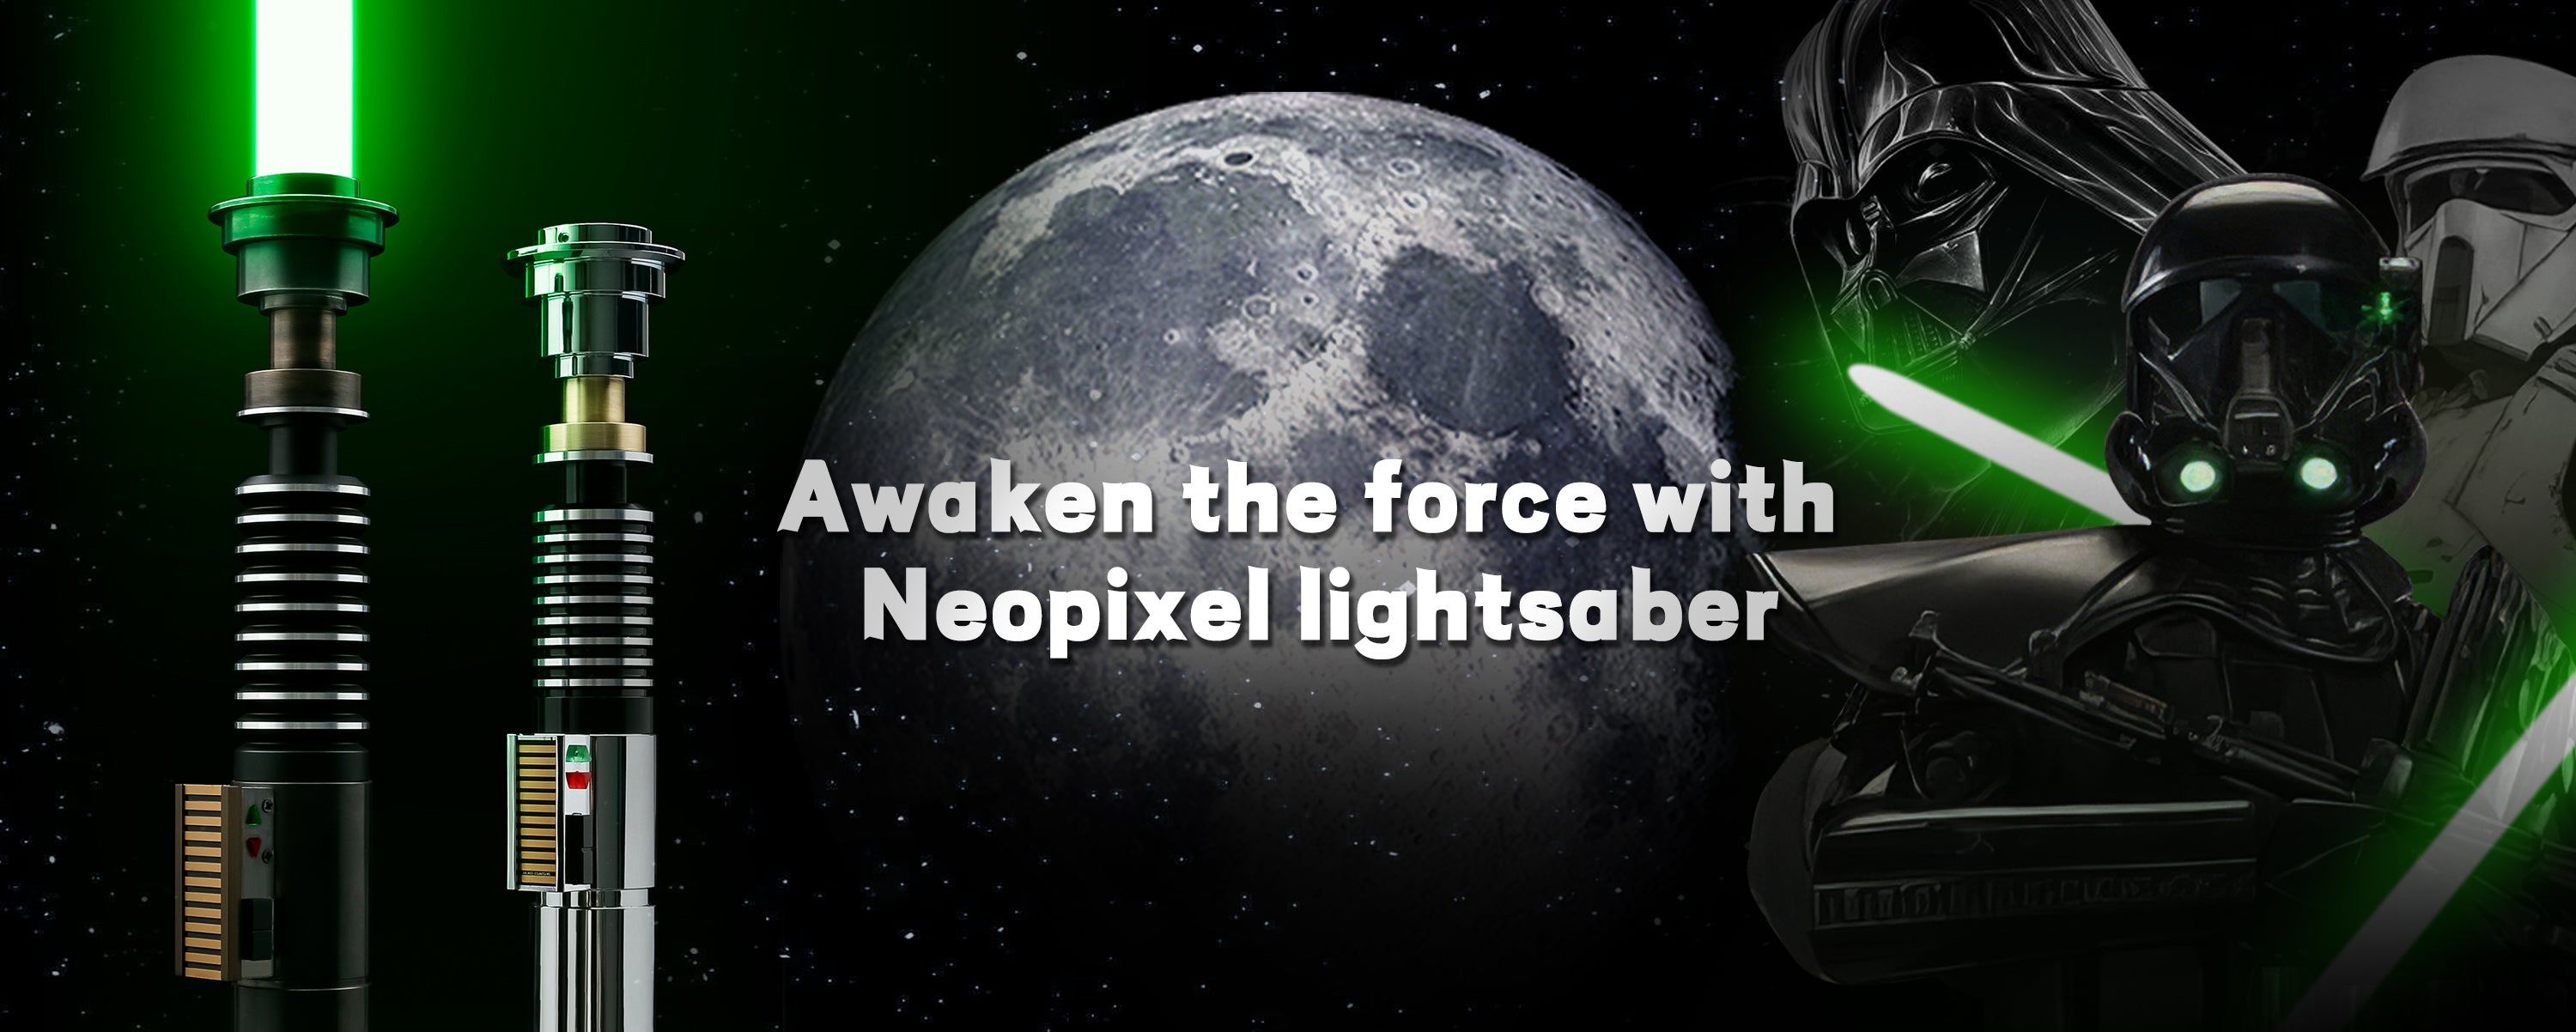 CXSABER fans, the latest product we developed combined with the Star Wars lightsaber, here is a new type of lightsaber that has not appeared in the movie, come and experience it!